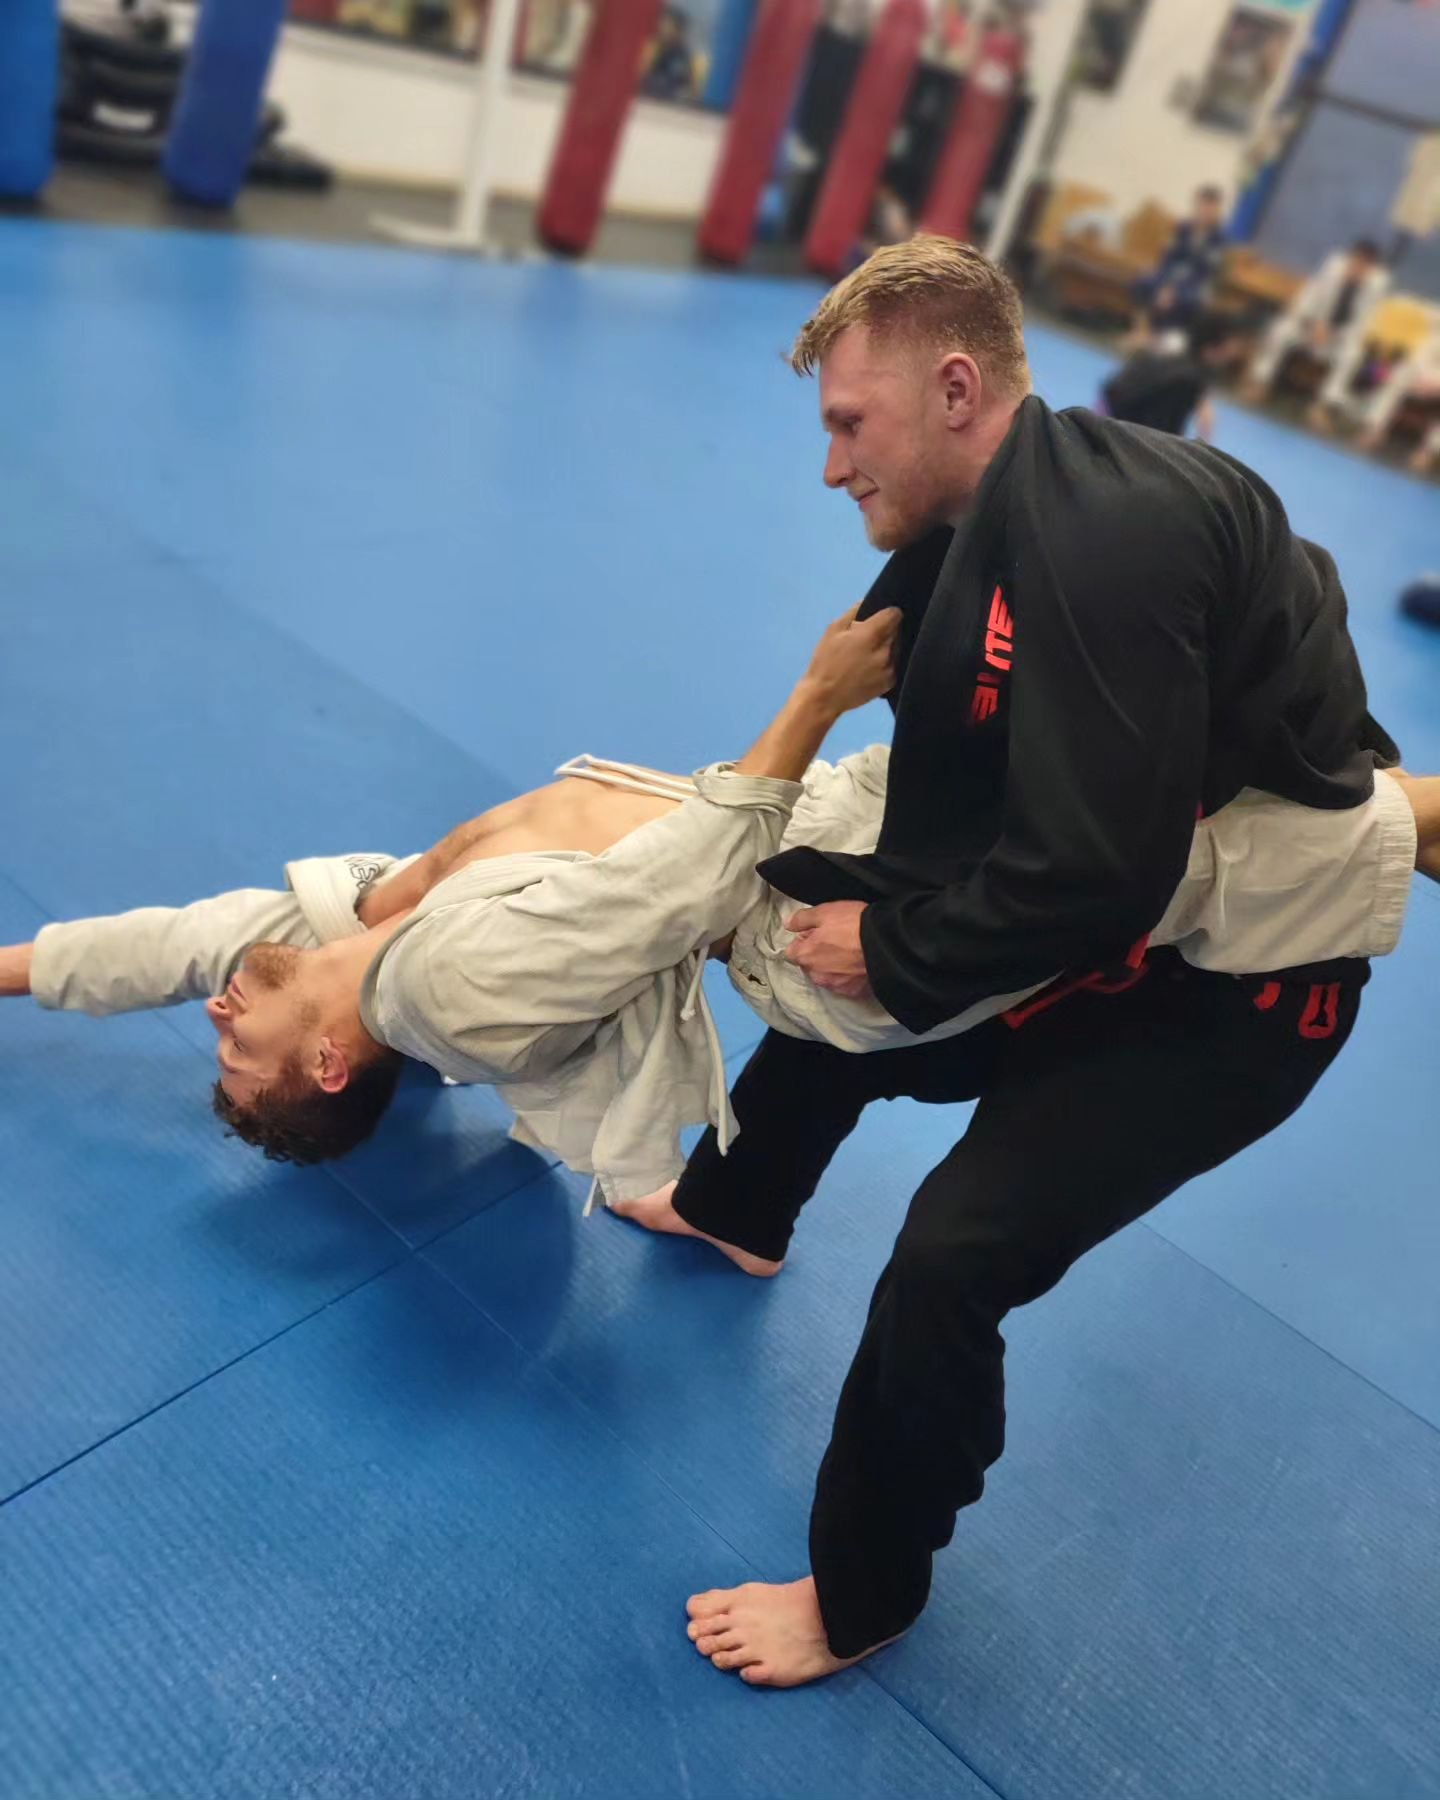 If you can't dance with your training partners... Are they even worth having? Come dance the art of Jui Jitsu with @cameronmetcalf45 and @ezra_fekkes #juijitsu #bjj #grappling #wrestling #805mma